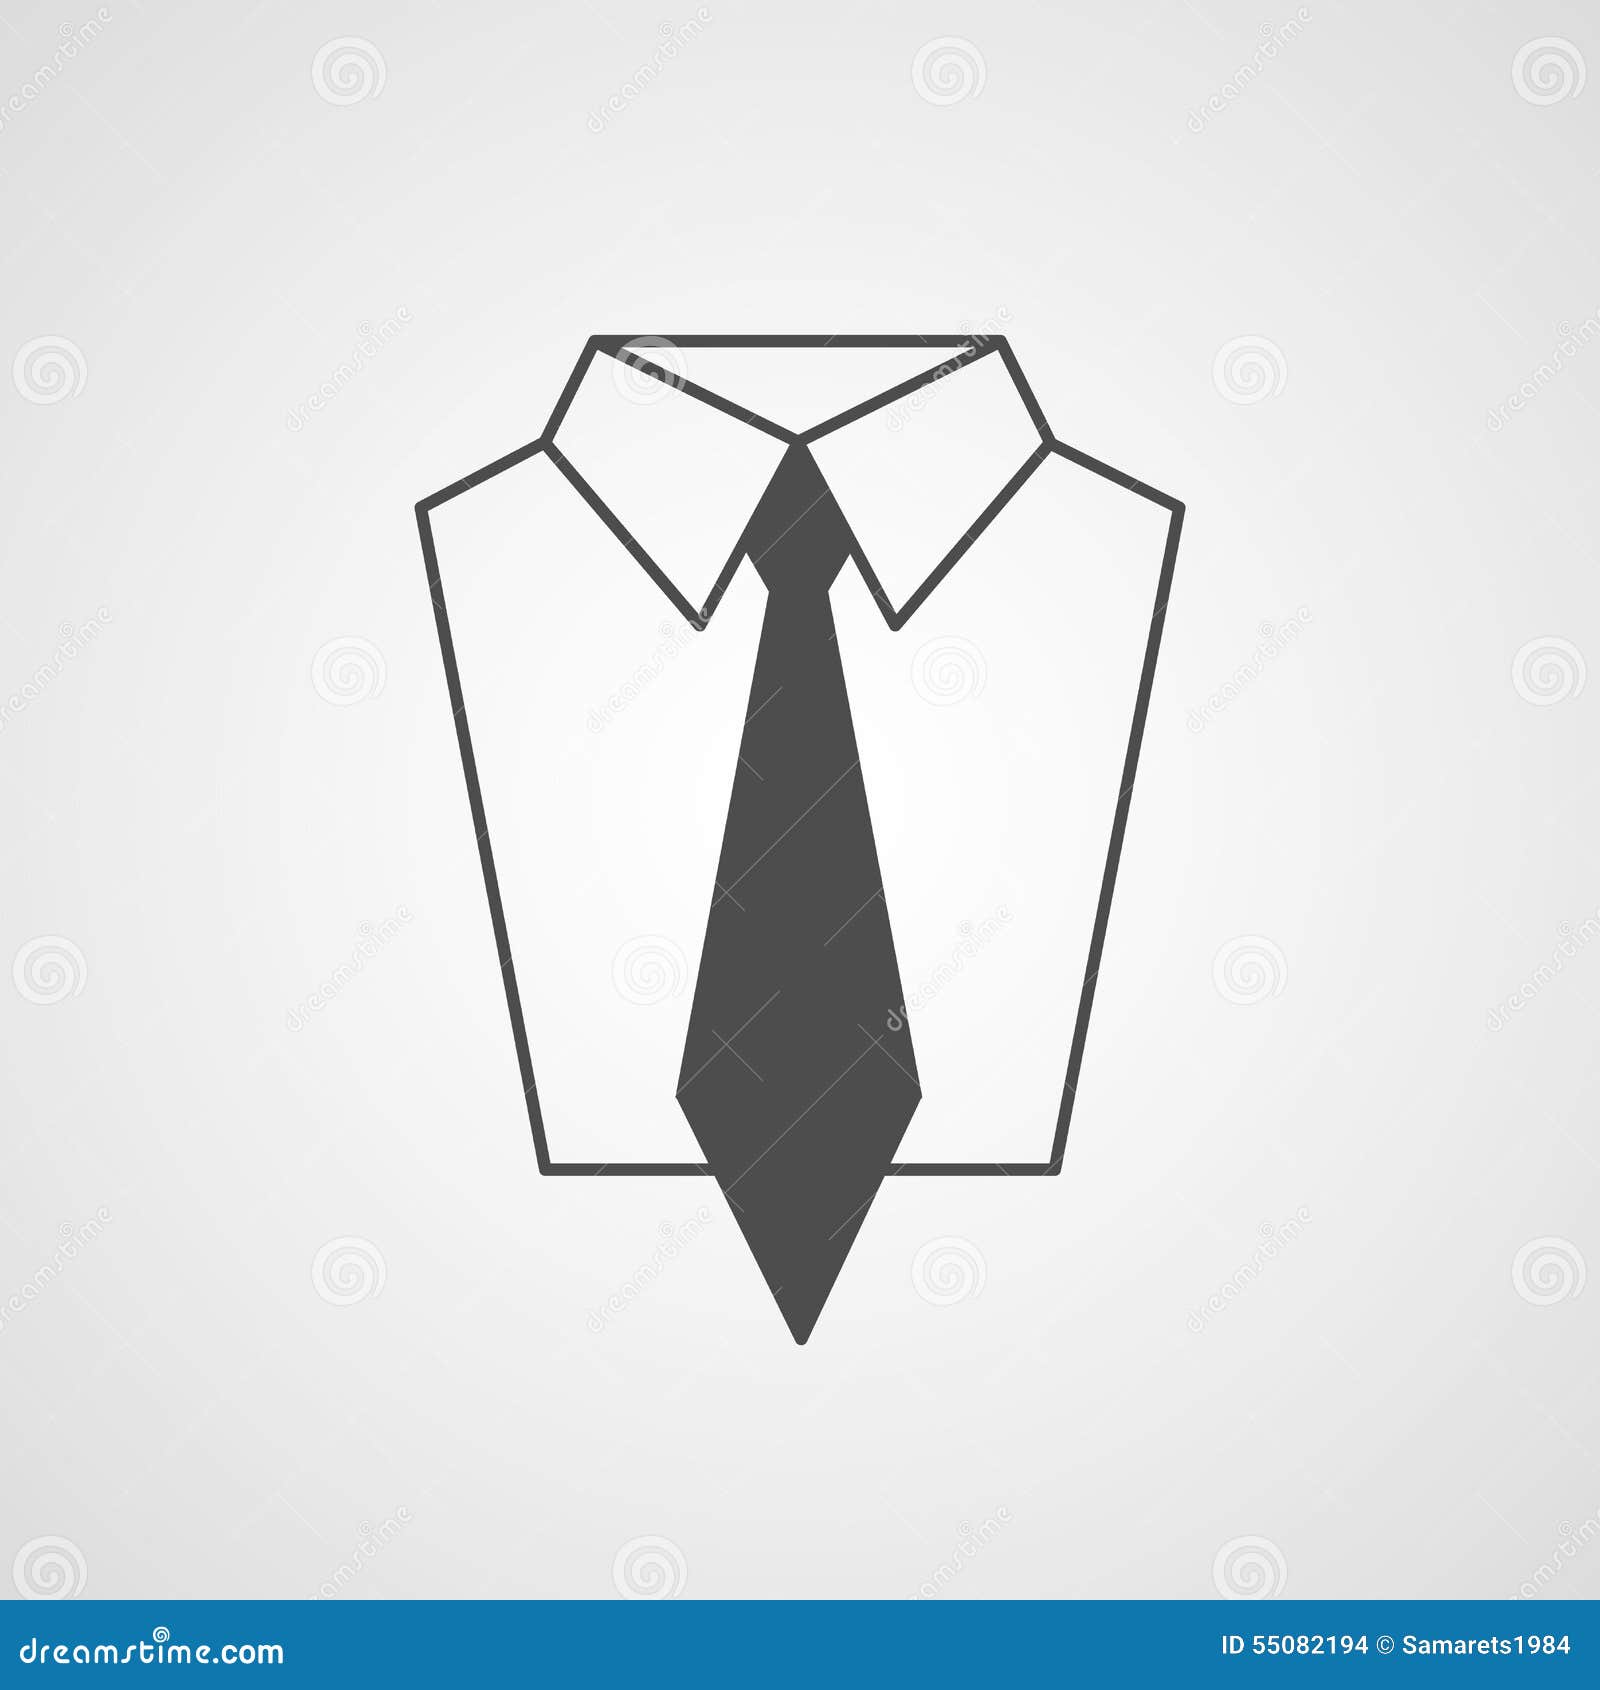 clipart shirt and tie - photo #30